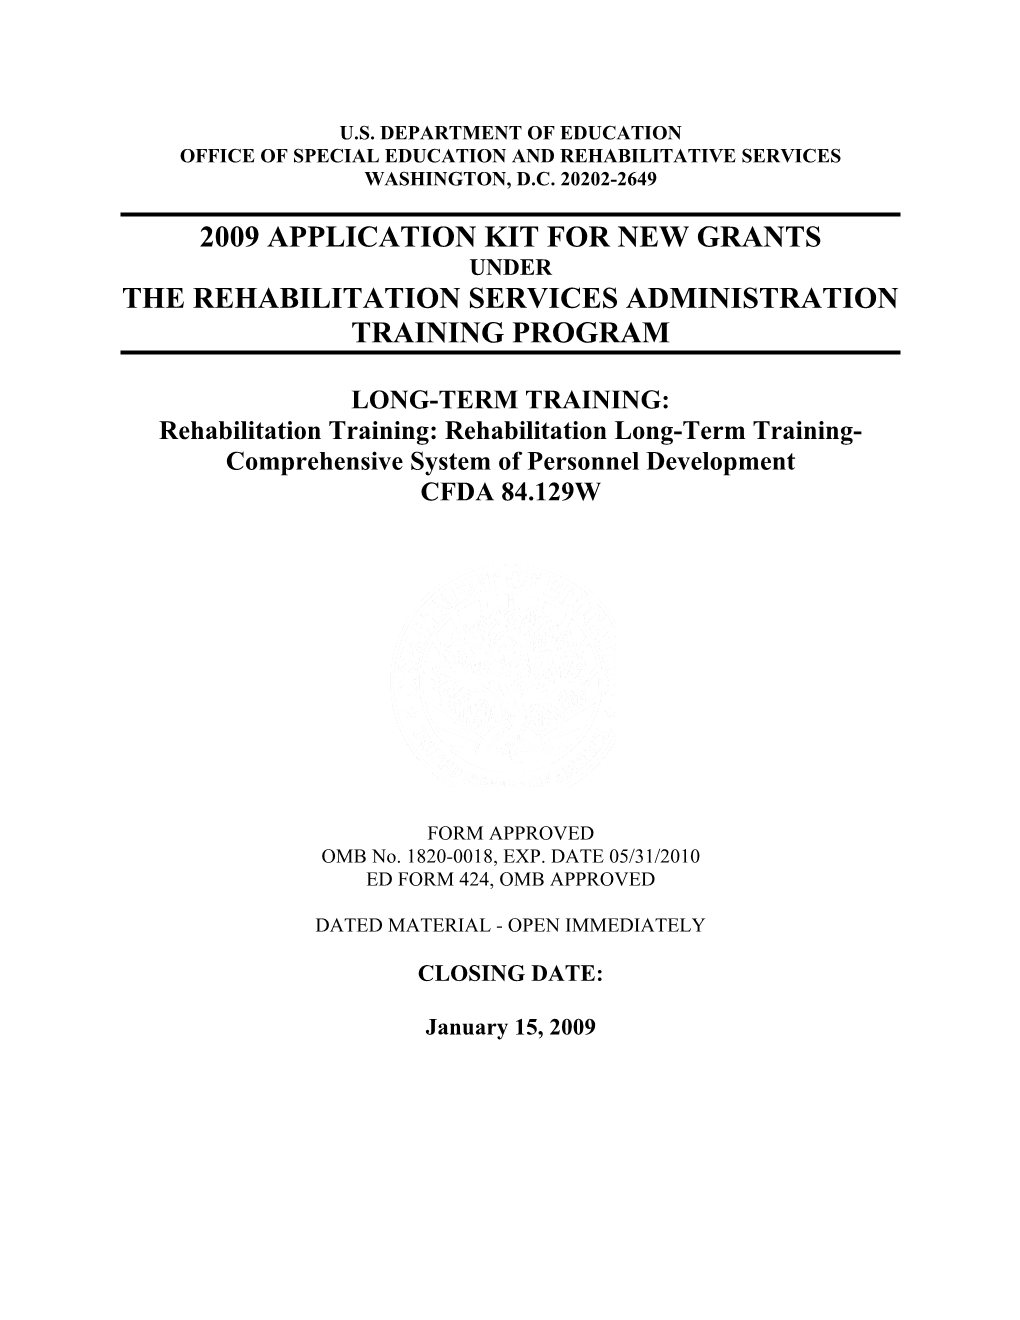 2009 Grant Application Rehabilitation Long-Term Training-Comprehensive System of Personnel